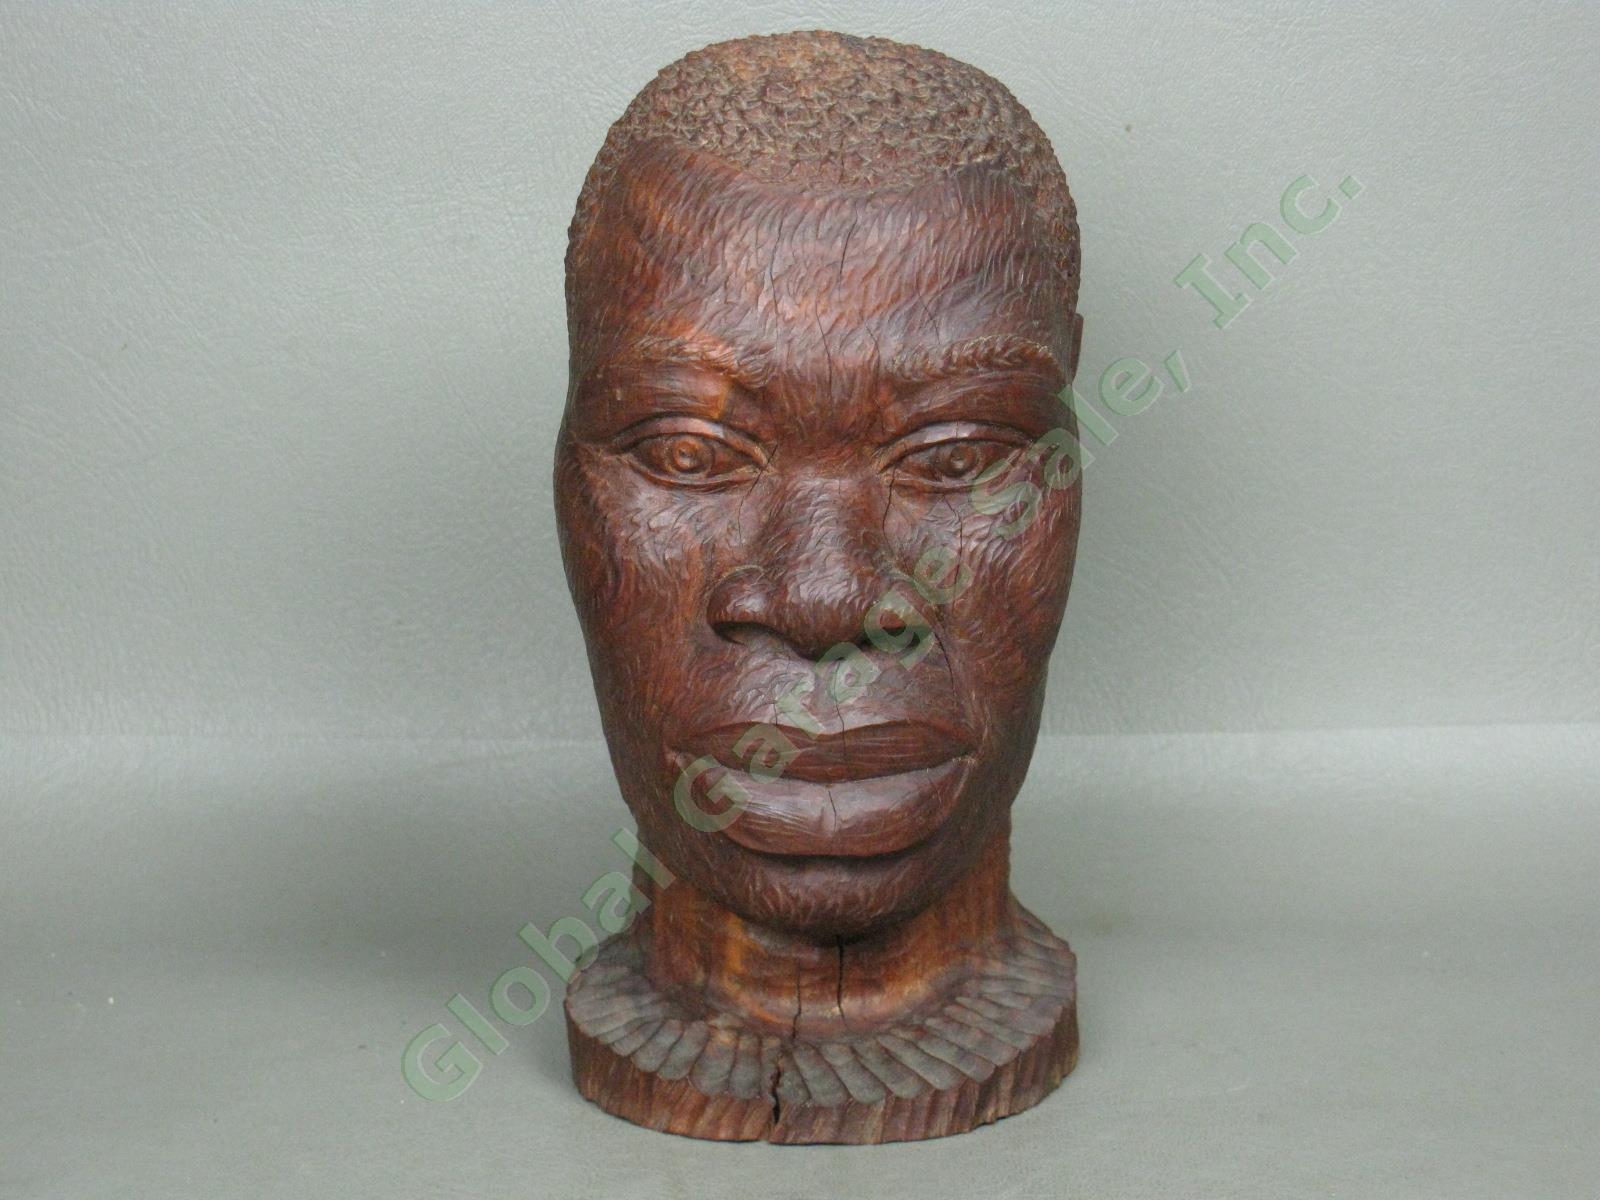 Vtg 1940s Jamaican Jamaica BWI 7" Male Head Bust Wood Carving Signed Lazarus NR!